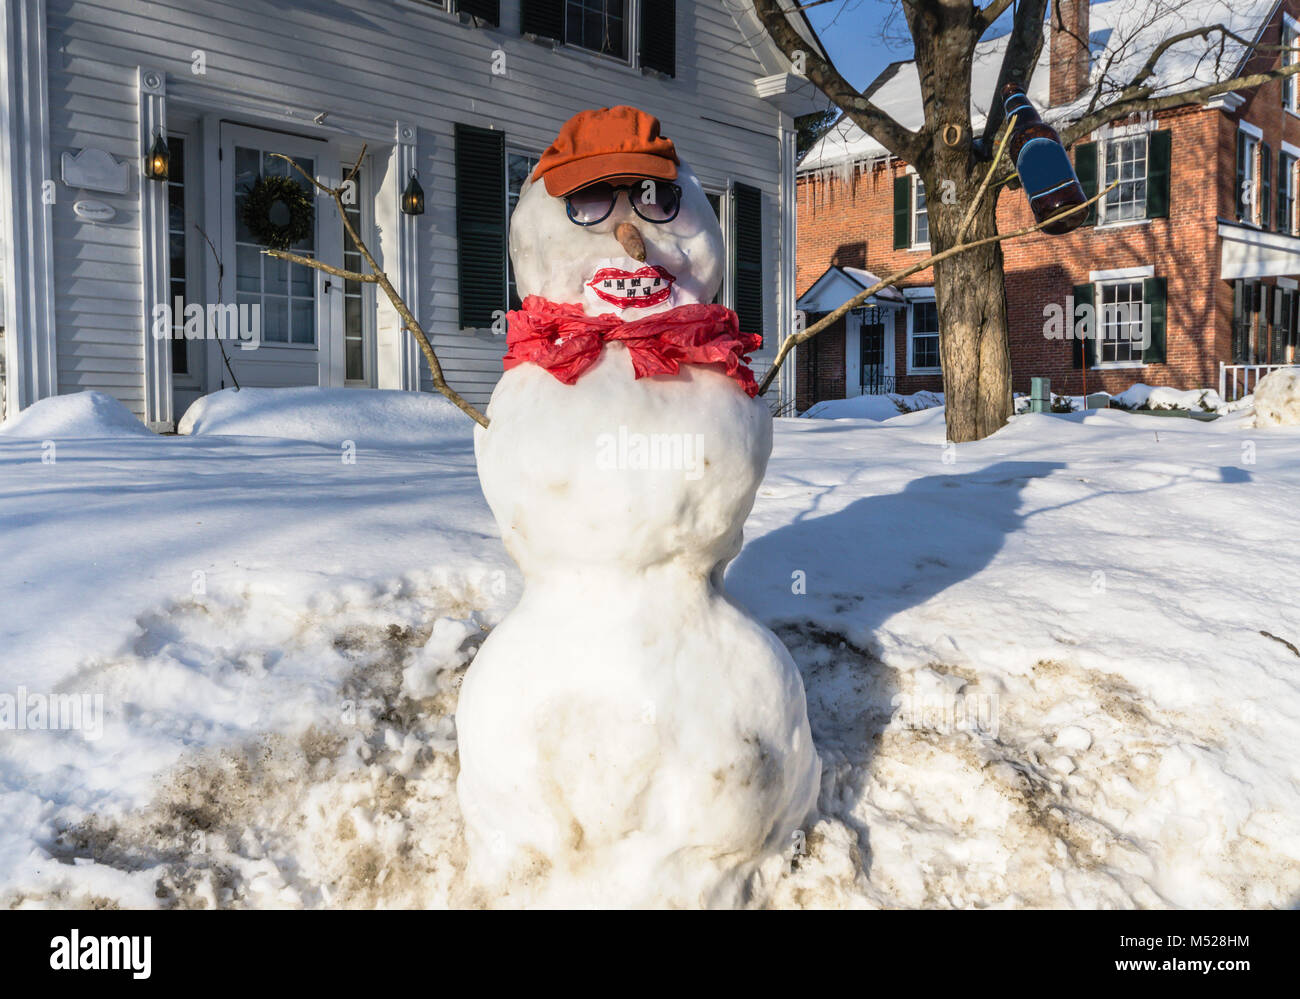 Funny snowman adorned with bucktooth smile, baseball cap, and bottle of beer. Stock Photo